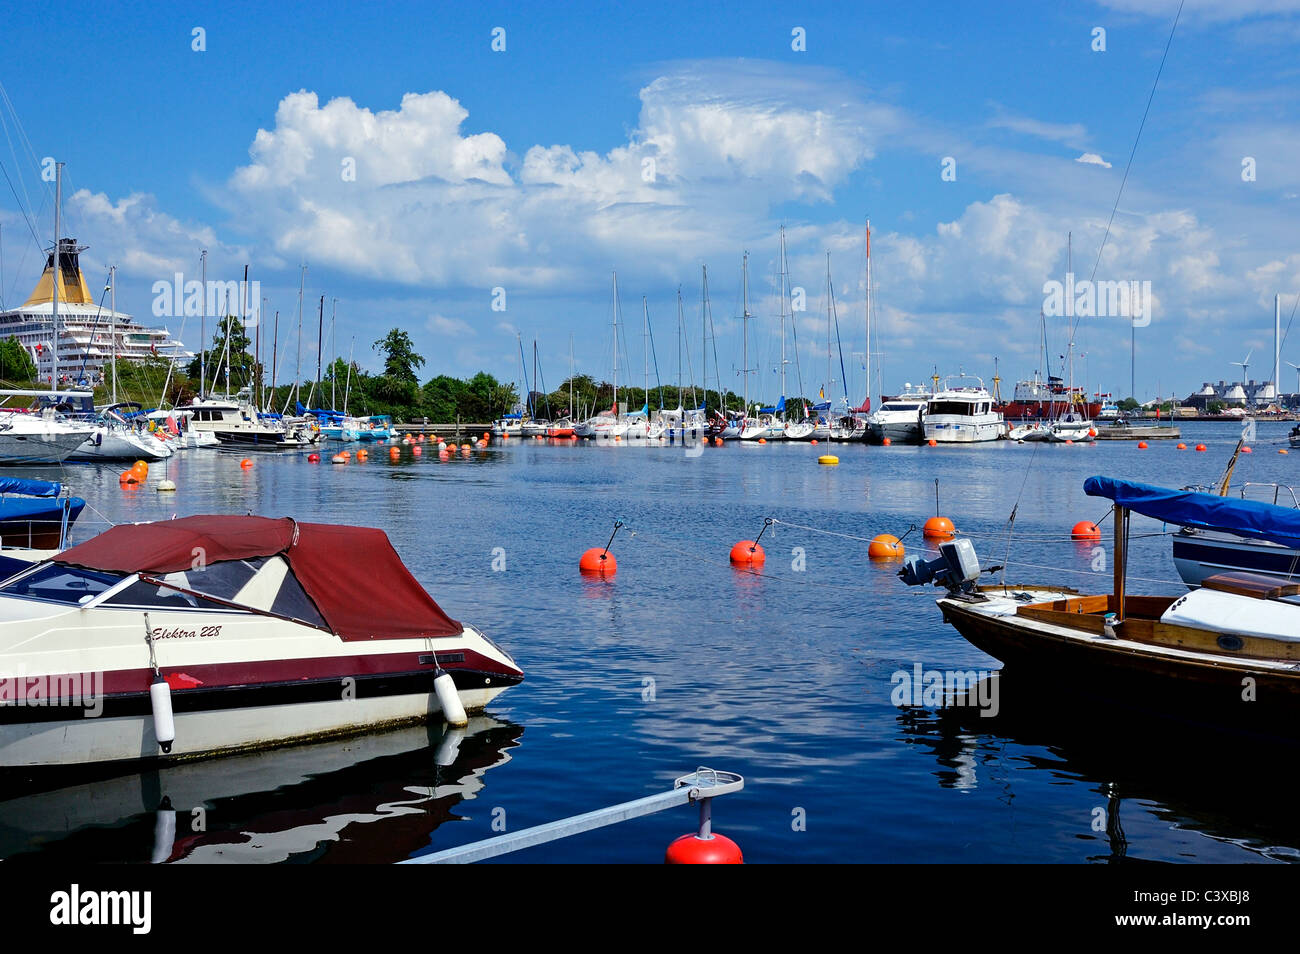 A view over small pleasure boats moored in a pleasant waterfront towards a cruise ship berthed at Langelinie pier, Copenhagen Stock Photo